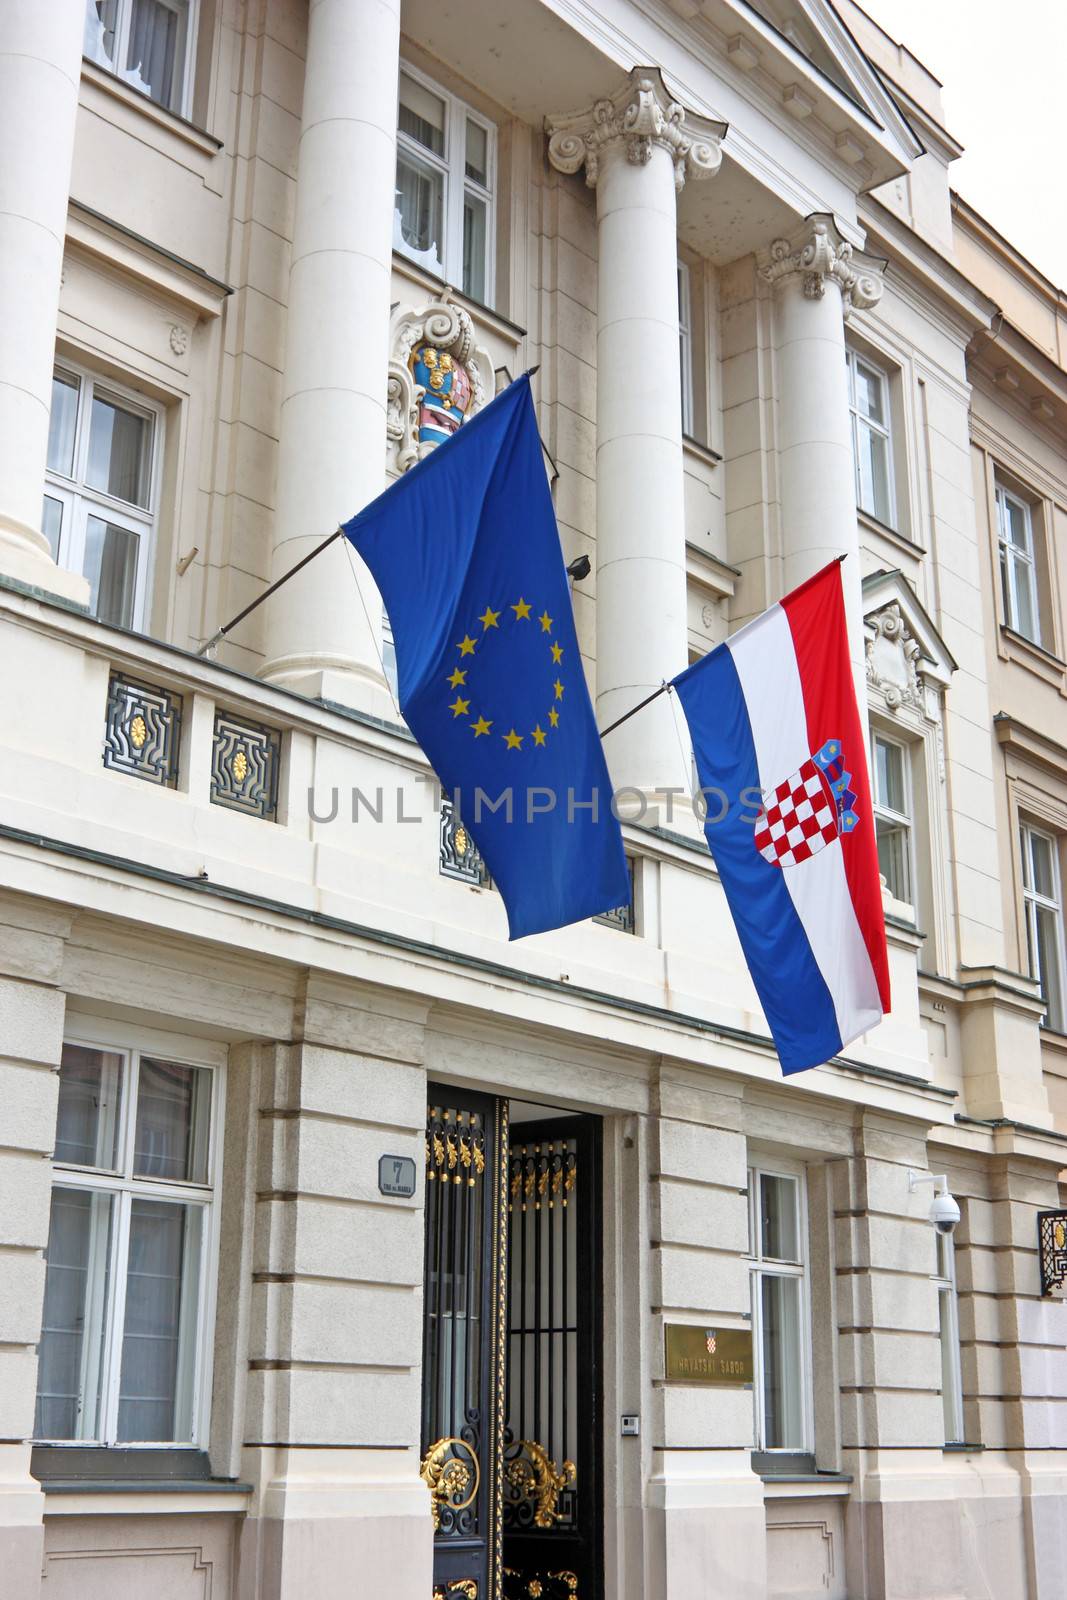 Entrance to the Croatian Parliament with Flags of European Union and Croatia